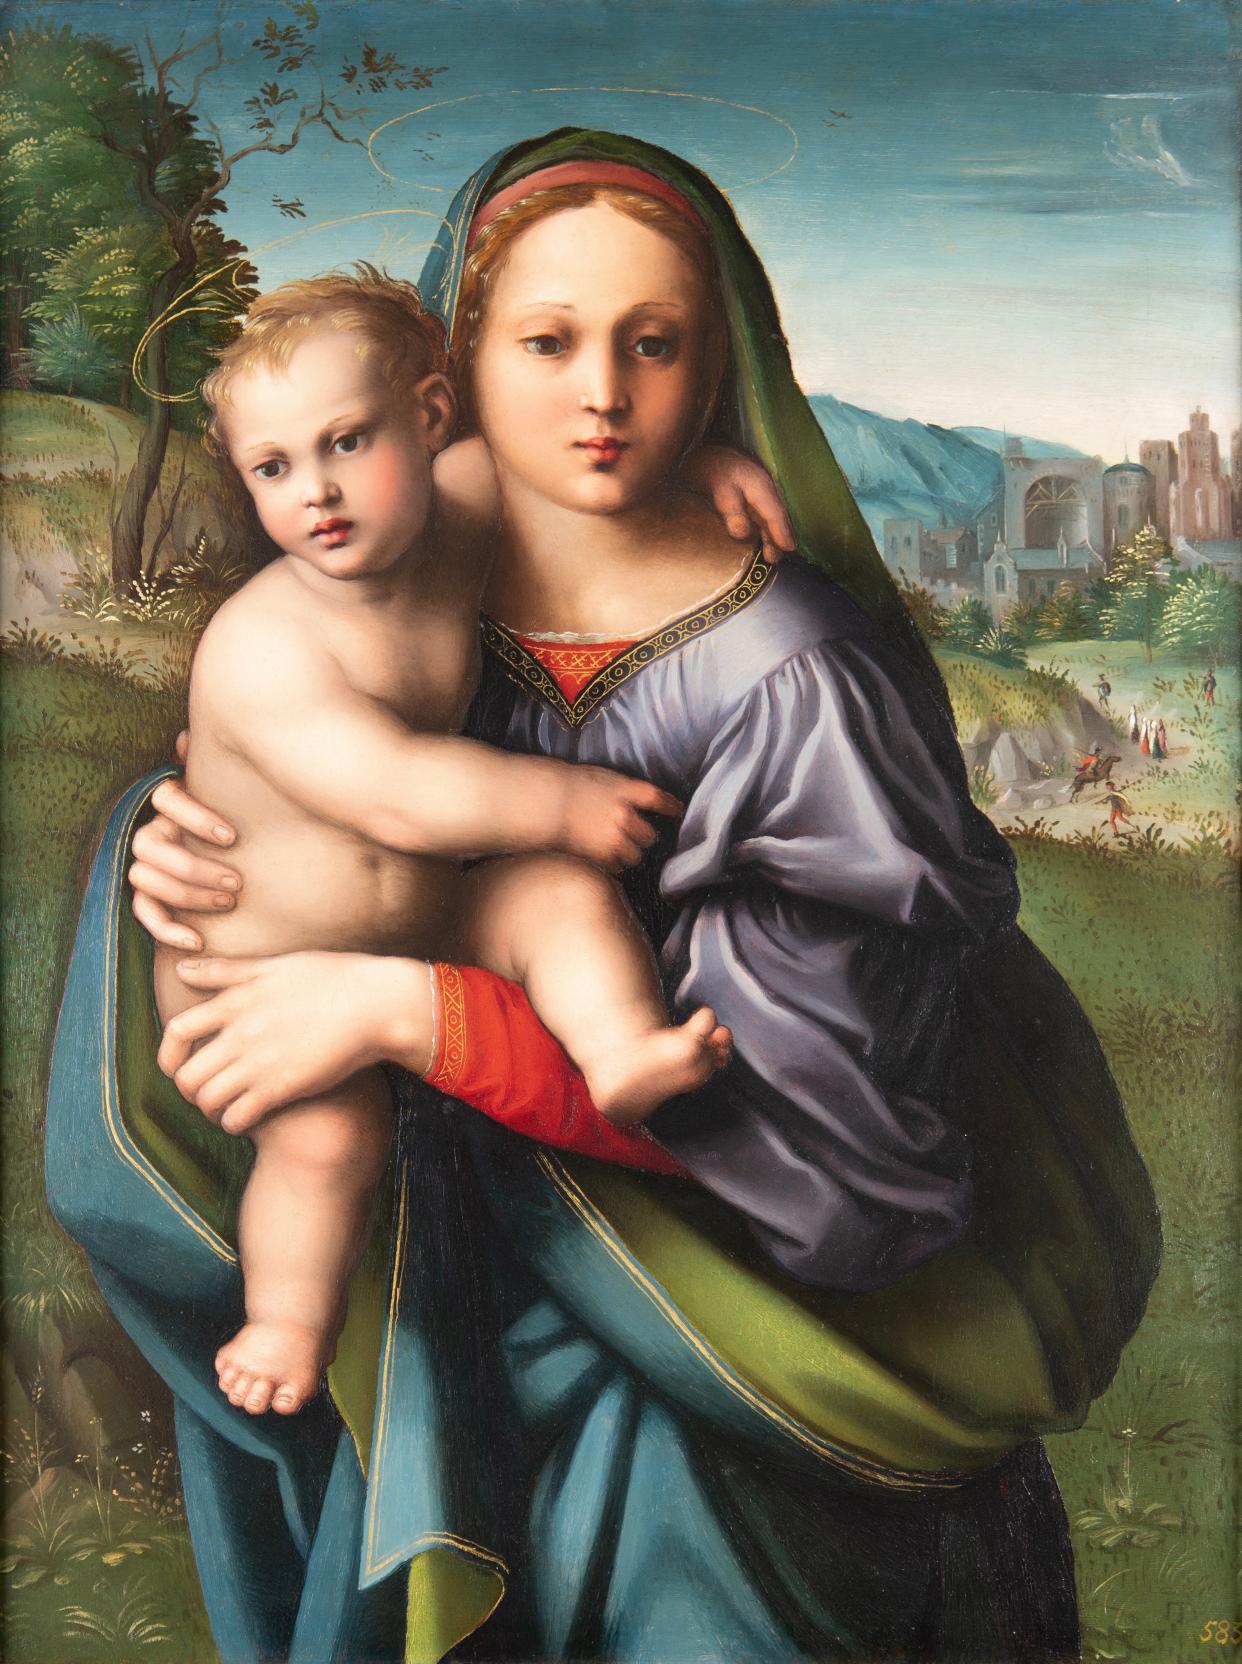 "Madonna and Child," (c. 1510-1520), by the Master of the Scandicci Lamentation. Now on view at Frascione Gallery through May 30.